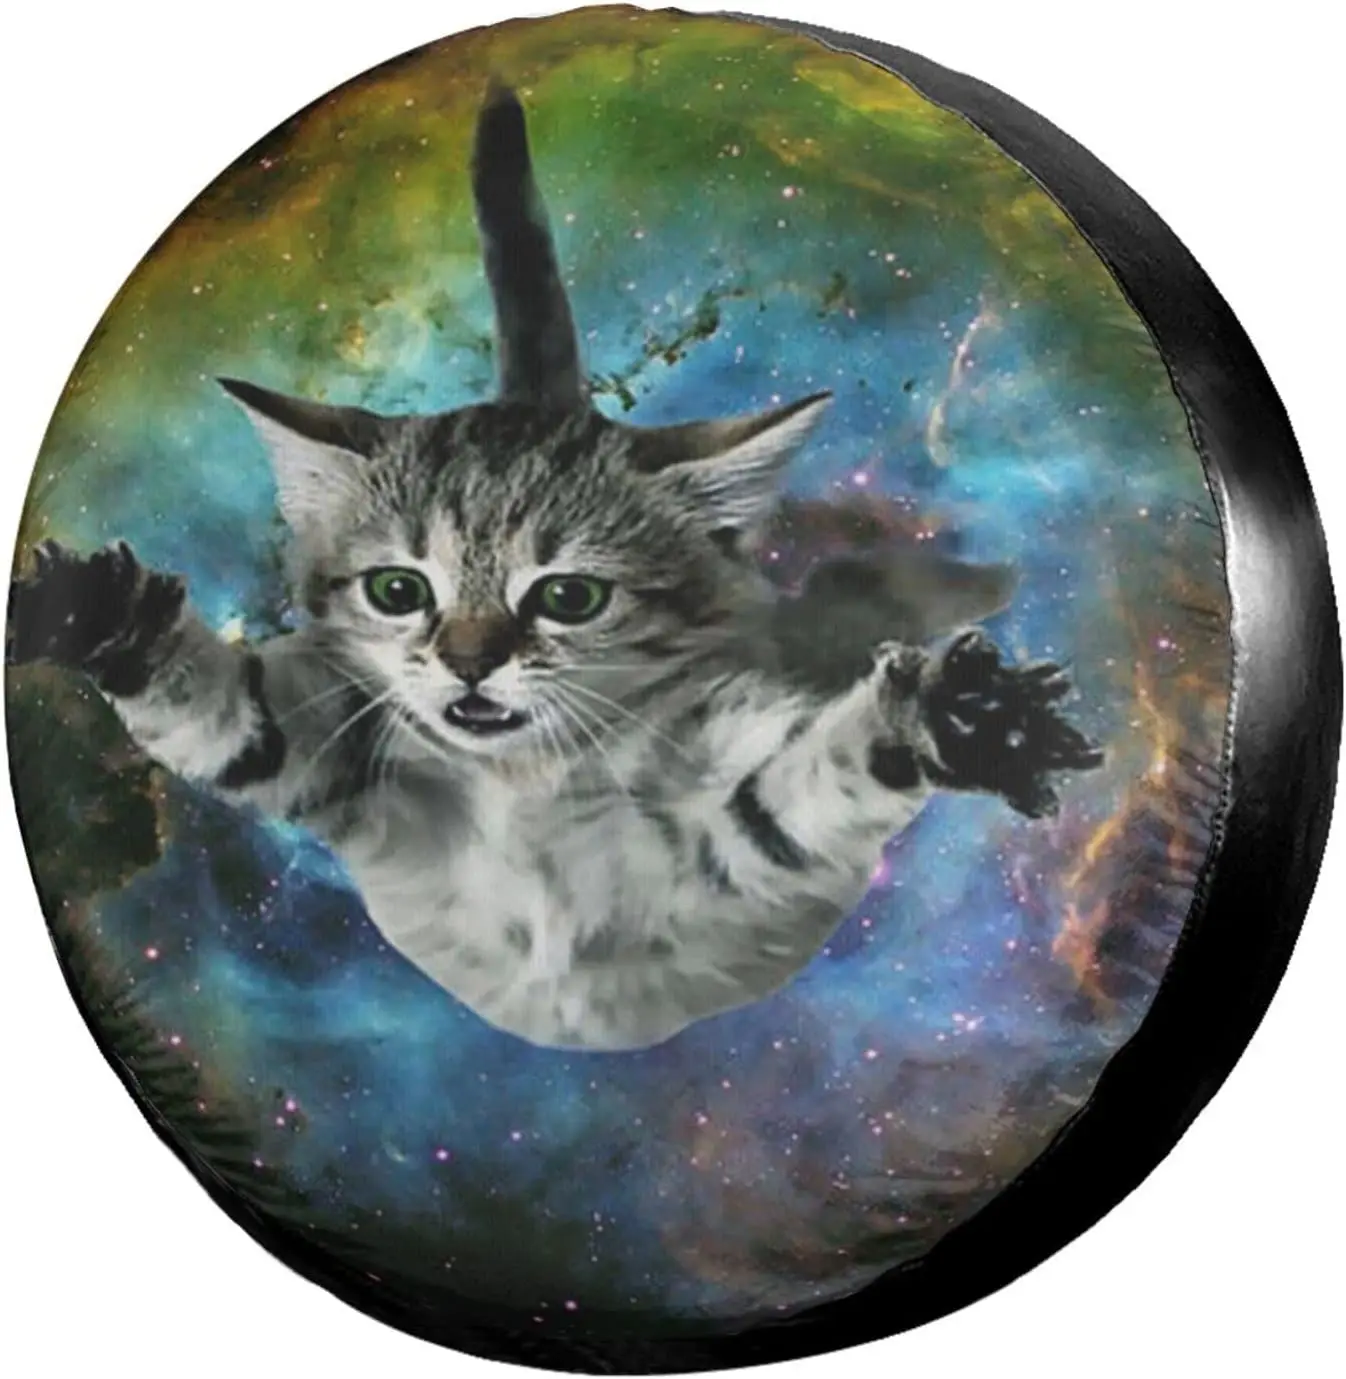 

Delerain Starry Sky Cat Spare Tire Covers for Car RV Trailer SUV Truck and Many Vehicle, Wheel Covers Sun Protector Waterproof